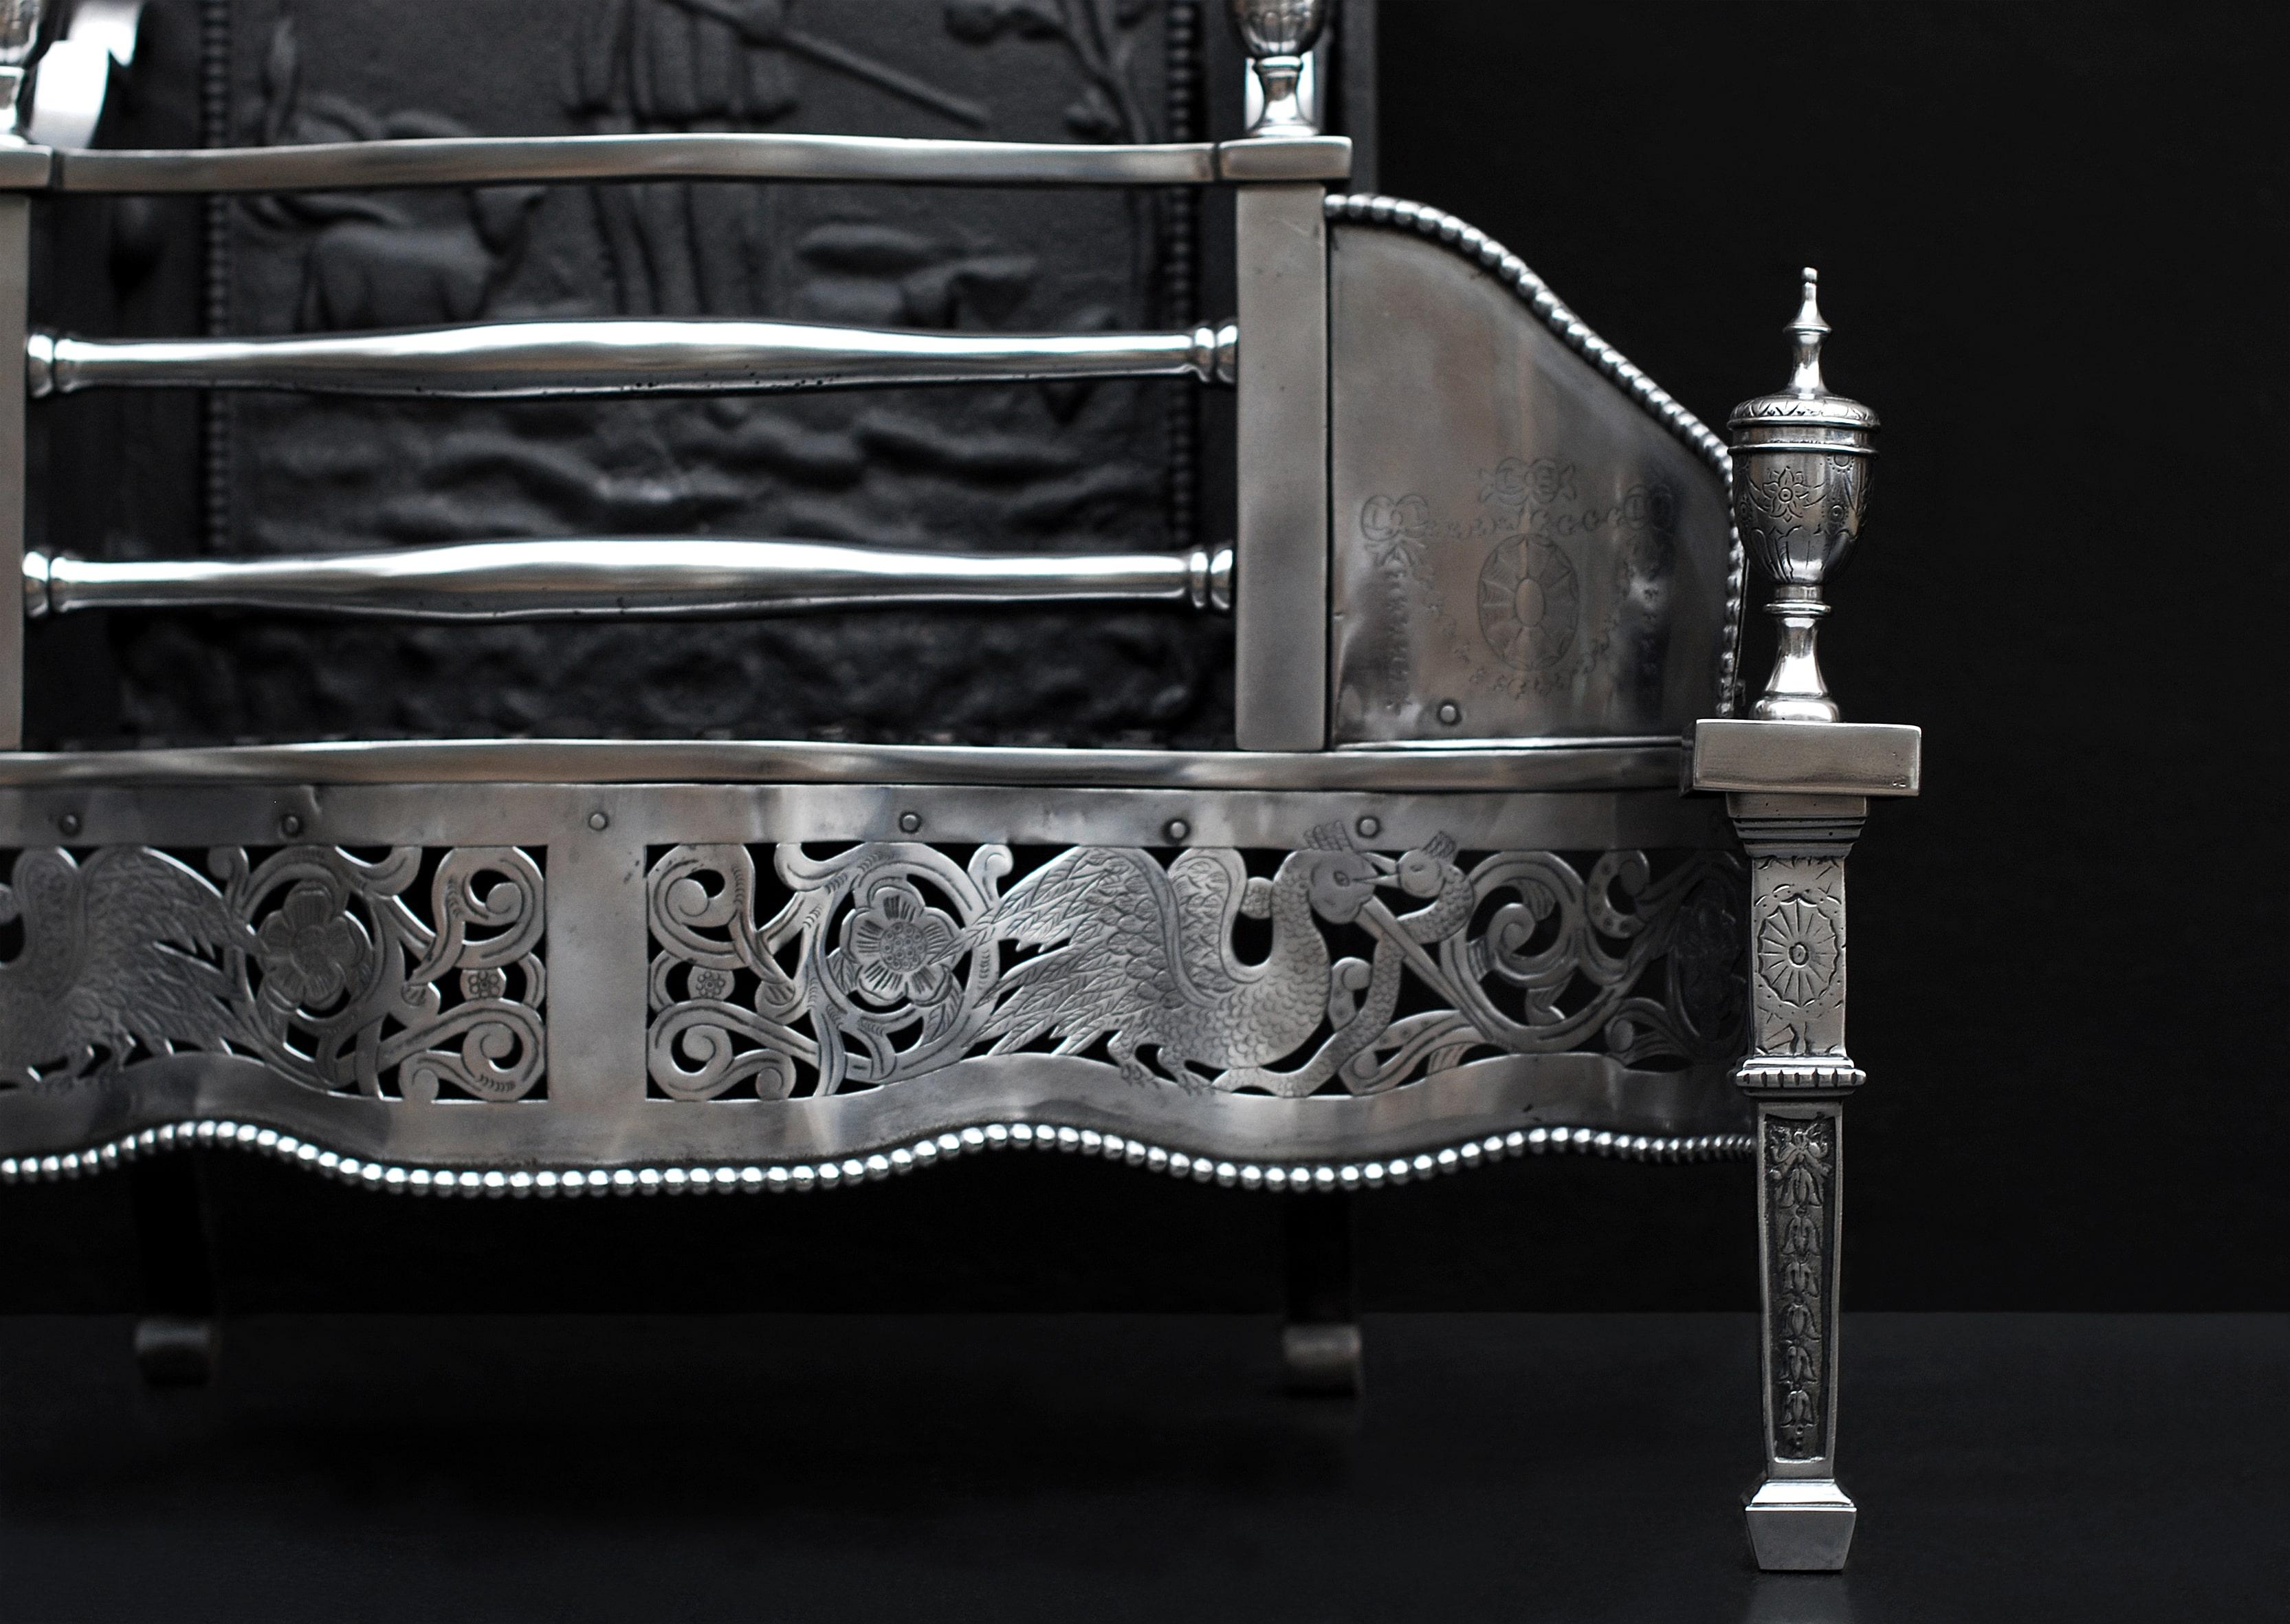 A George III style polished steel firegrate. The deep fret nicely pierced and engaved with storks and flower, the wings engraved with swags and ribbons. Engraved urn finials and tapering legs with patera and bell flowers. Decorative shaped back with